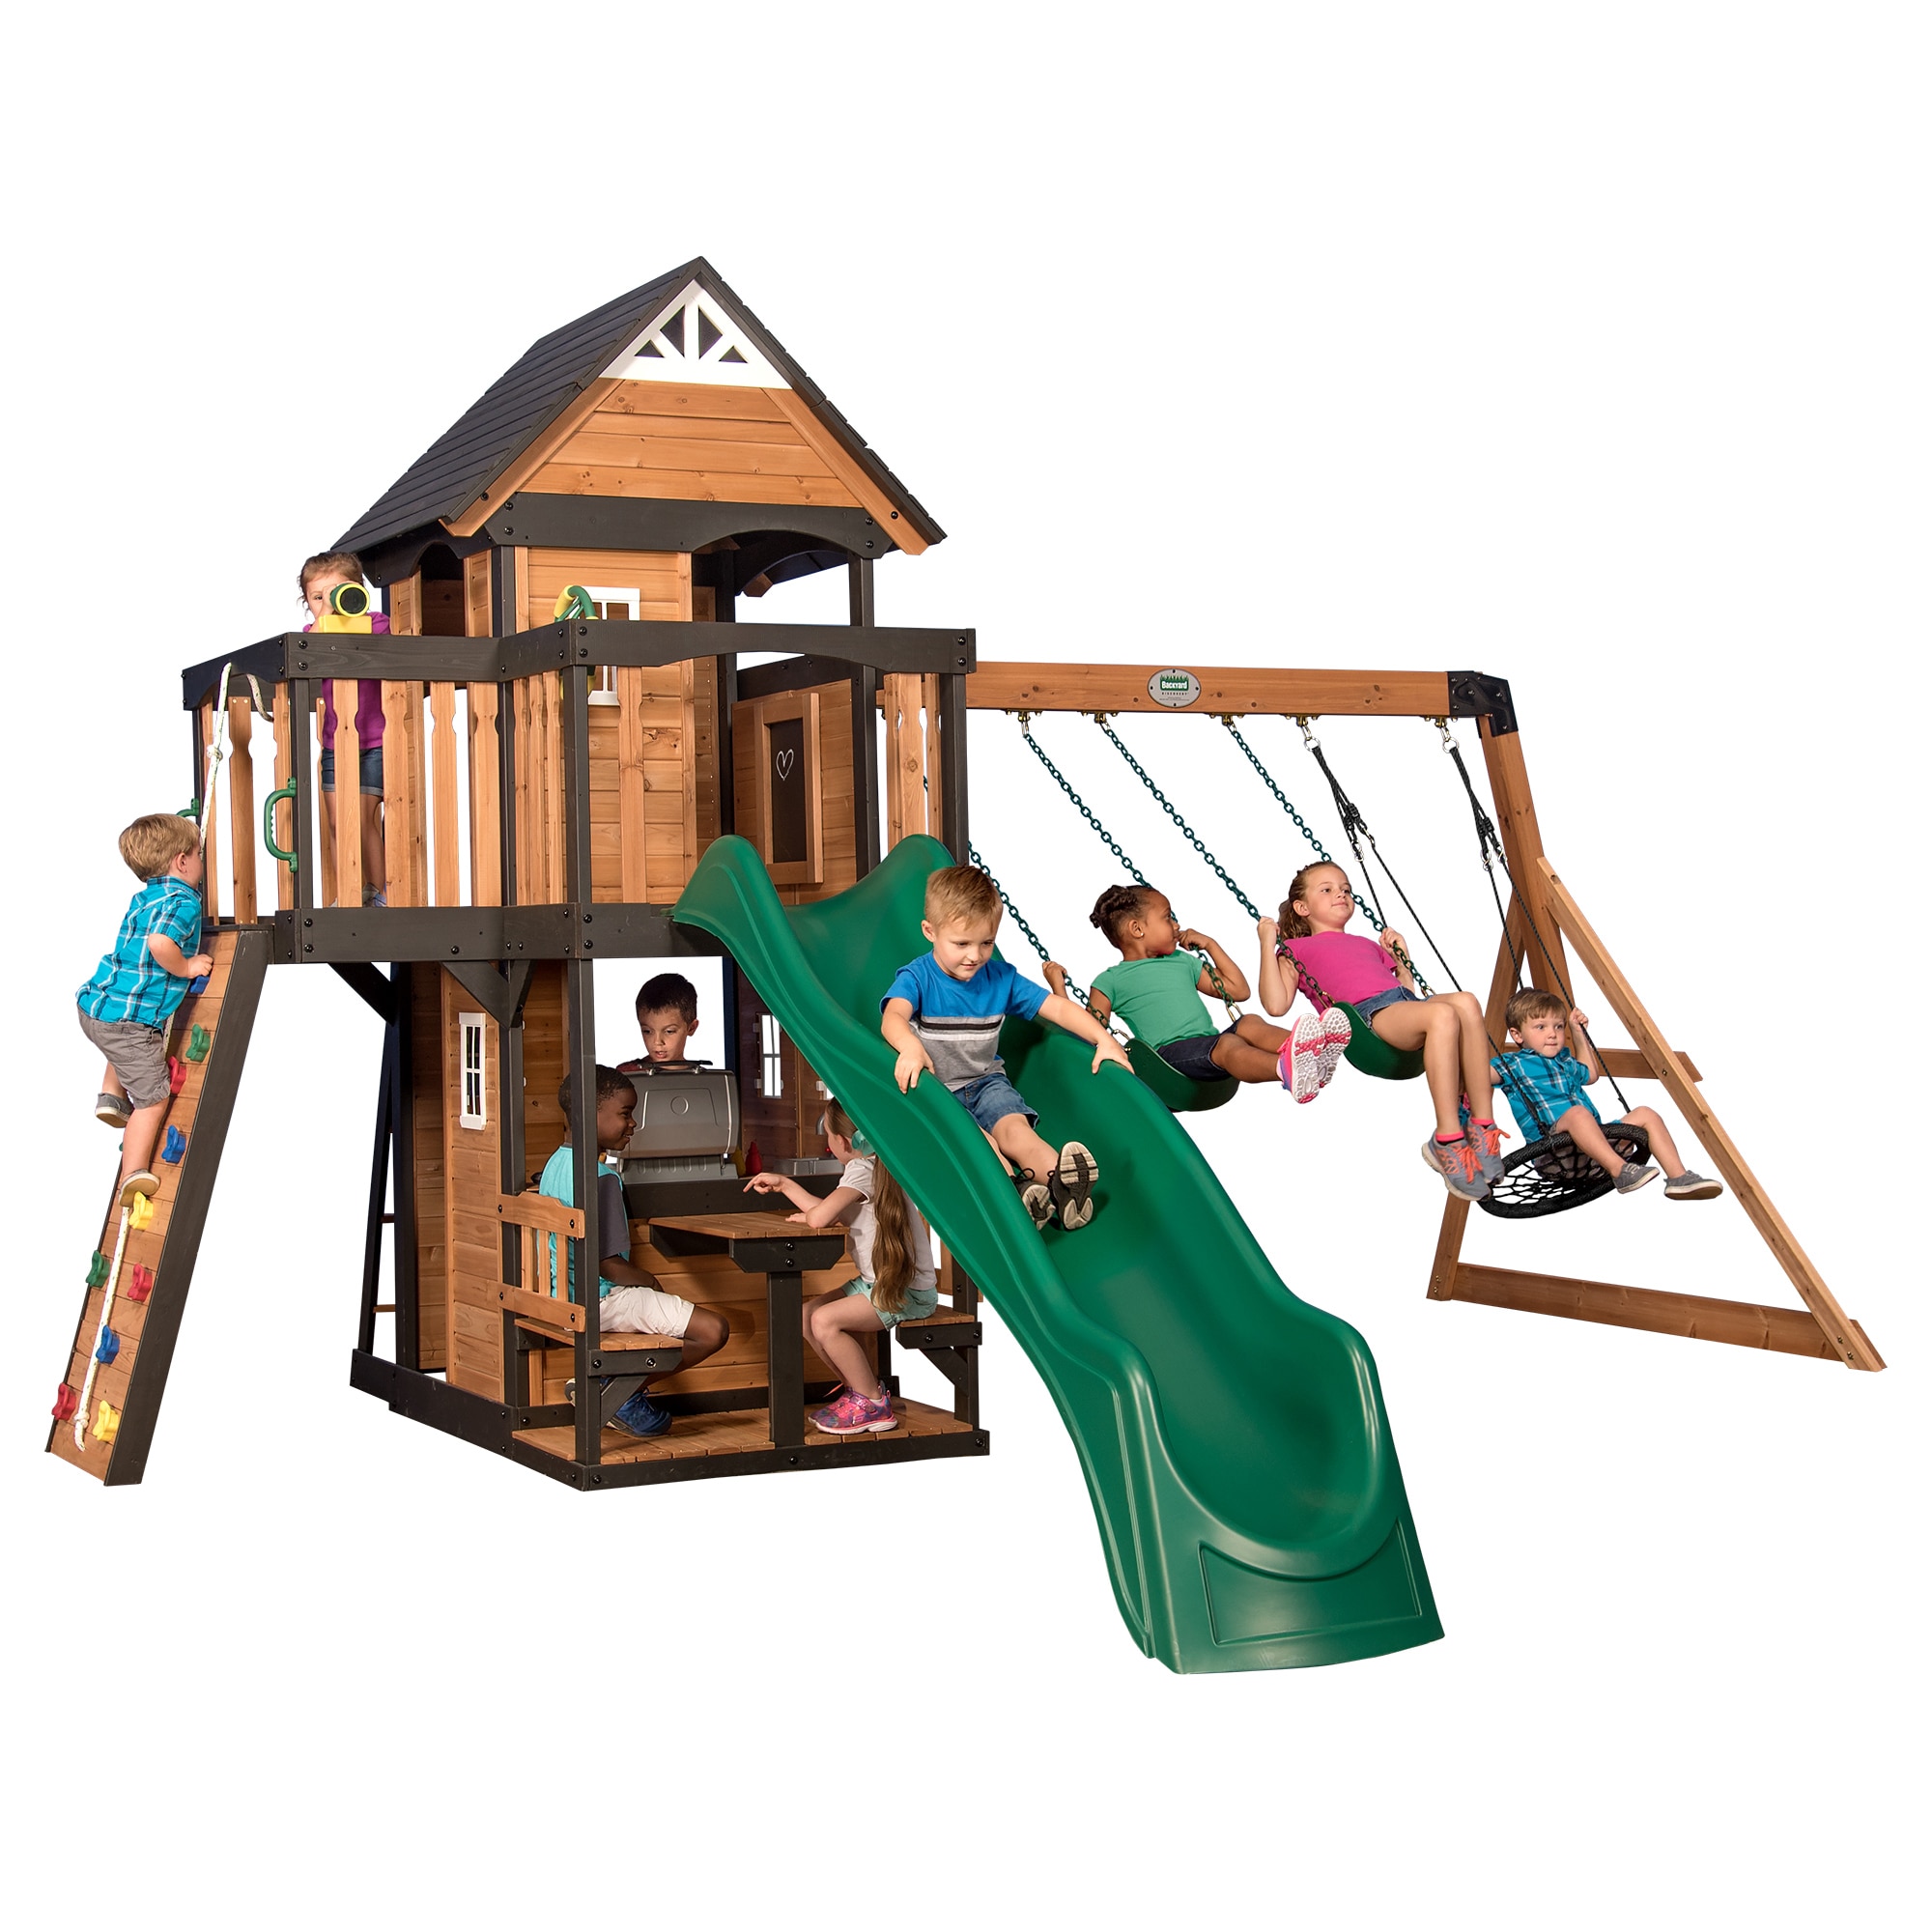 Red Wood Playsets & Swing Sets At Lowes.Com